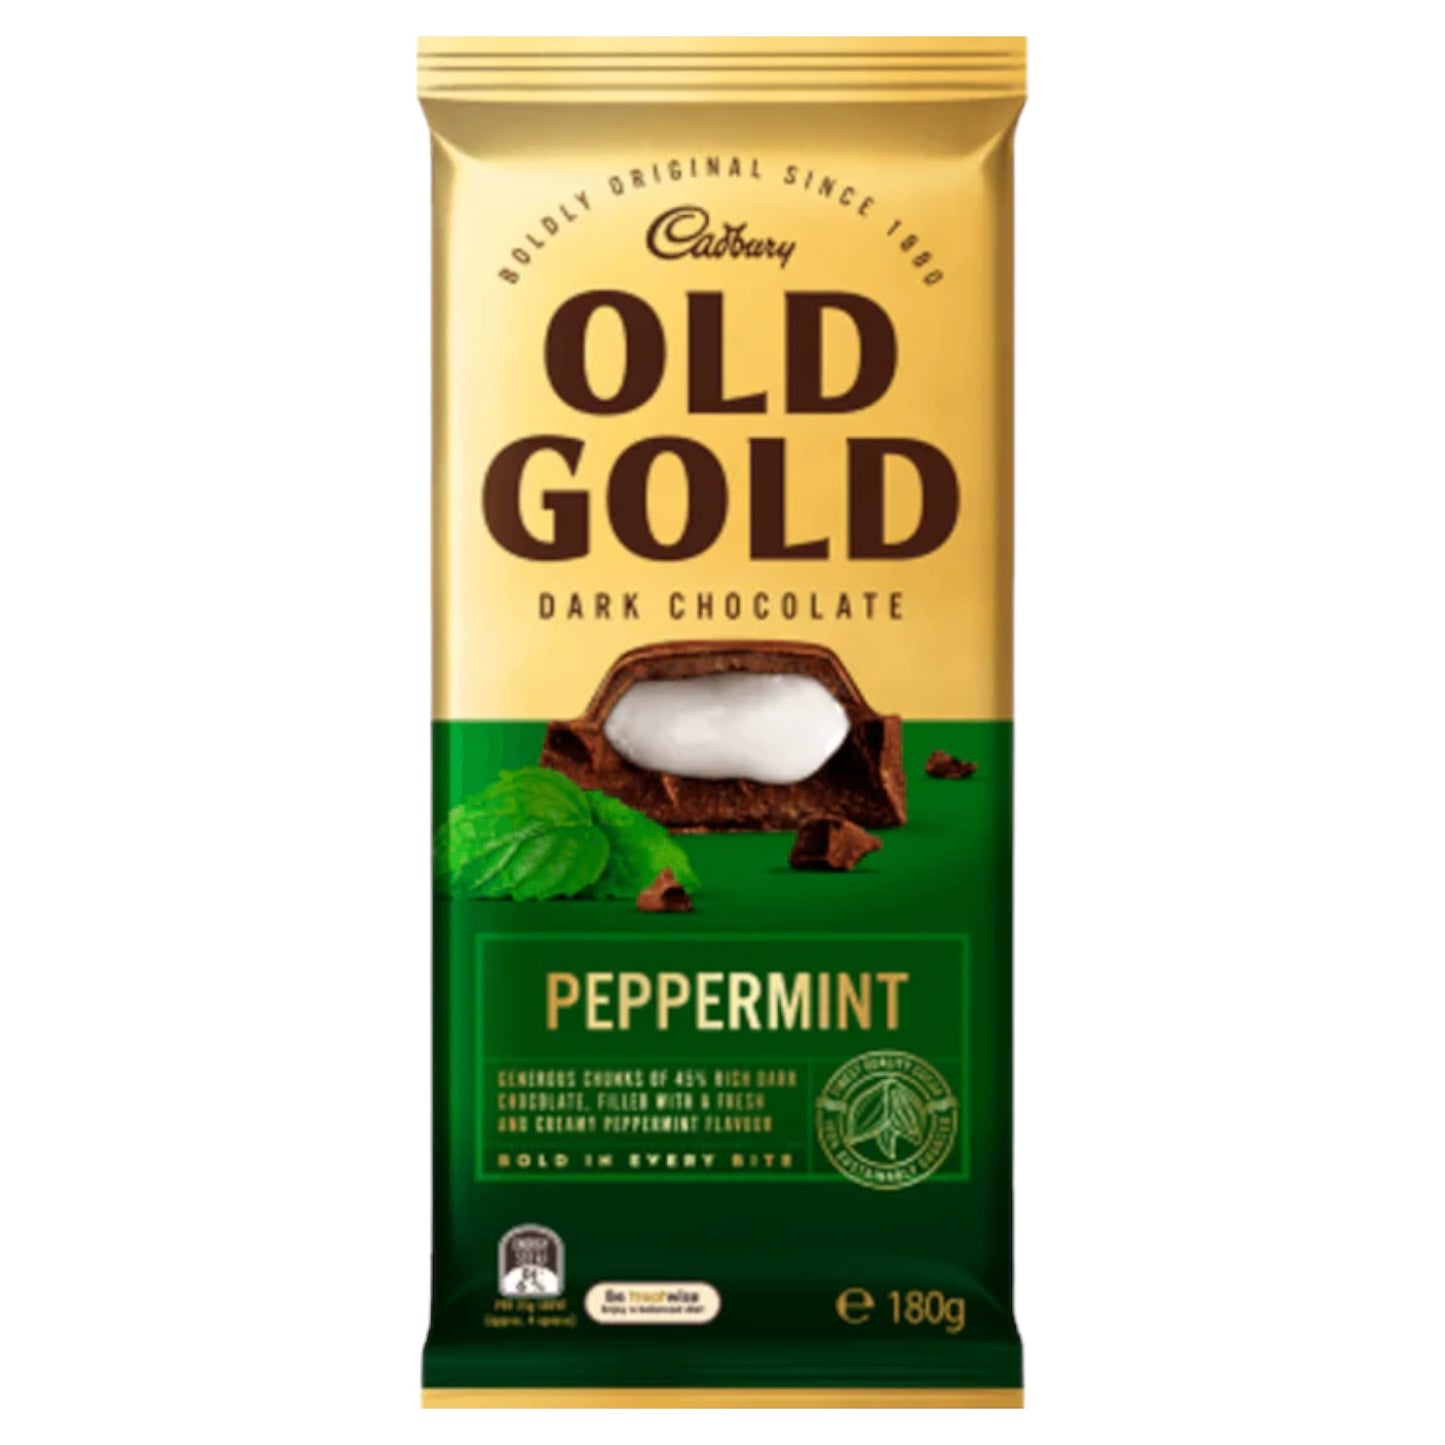 Old Gold Peppermint (180g)